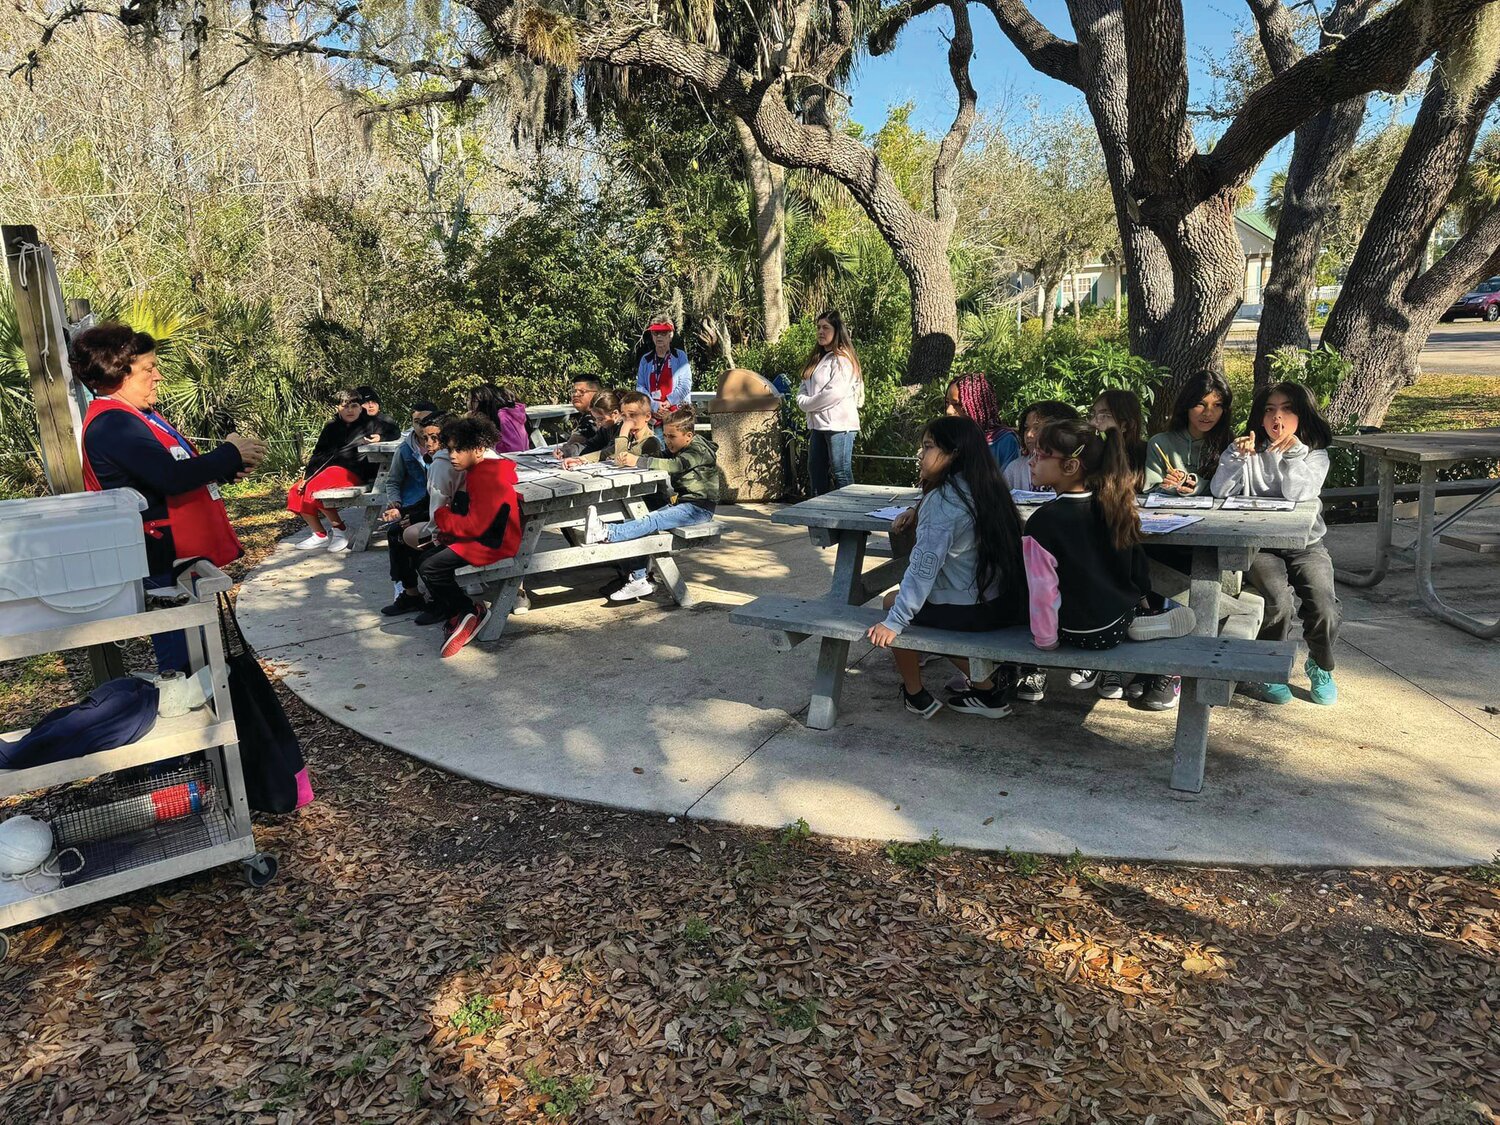 Fourth graders at Country Oaks Elementary School are learning about Florida manatees. They visited Manatee Park as a field trip. [Photo courtesy Country Oaks Elementary School]